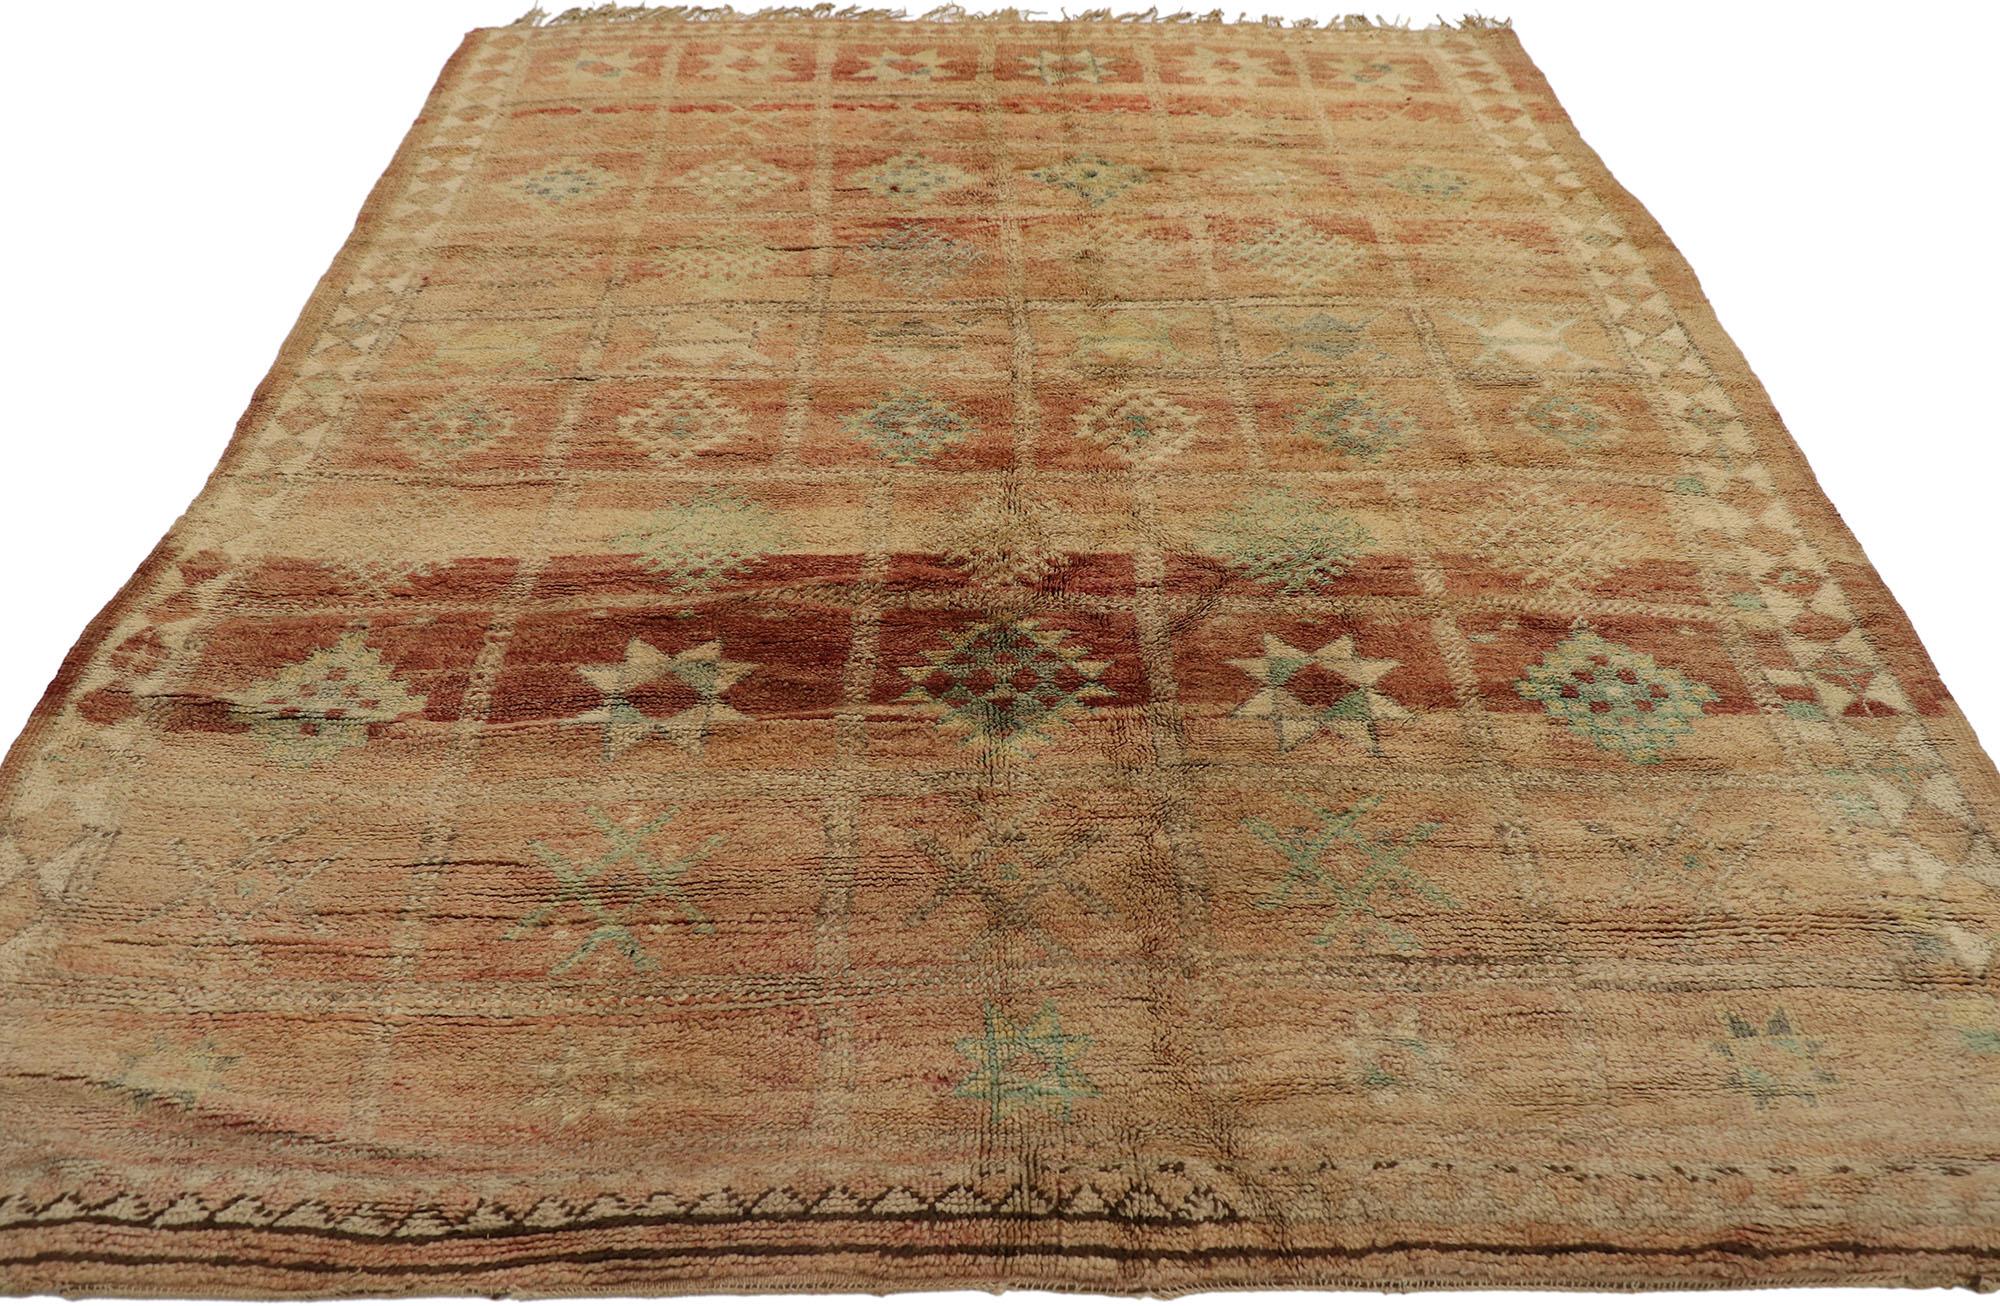 Hand-Knotted Vintage Beni MGuild Moroccan Rug, Spicy Global Style Meets Organic Modern For Sale